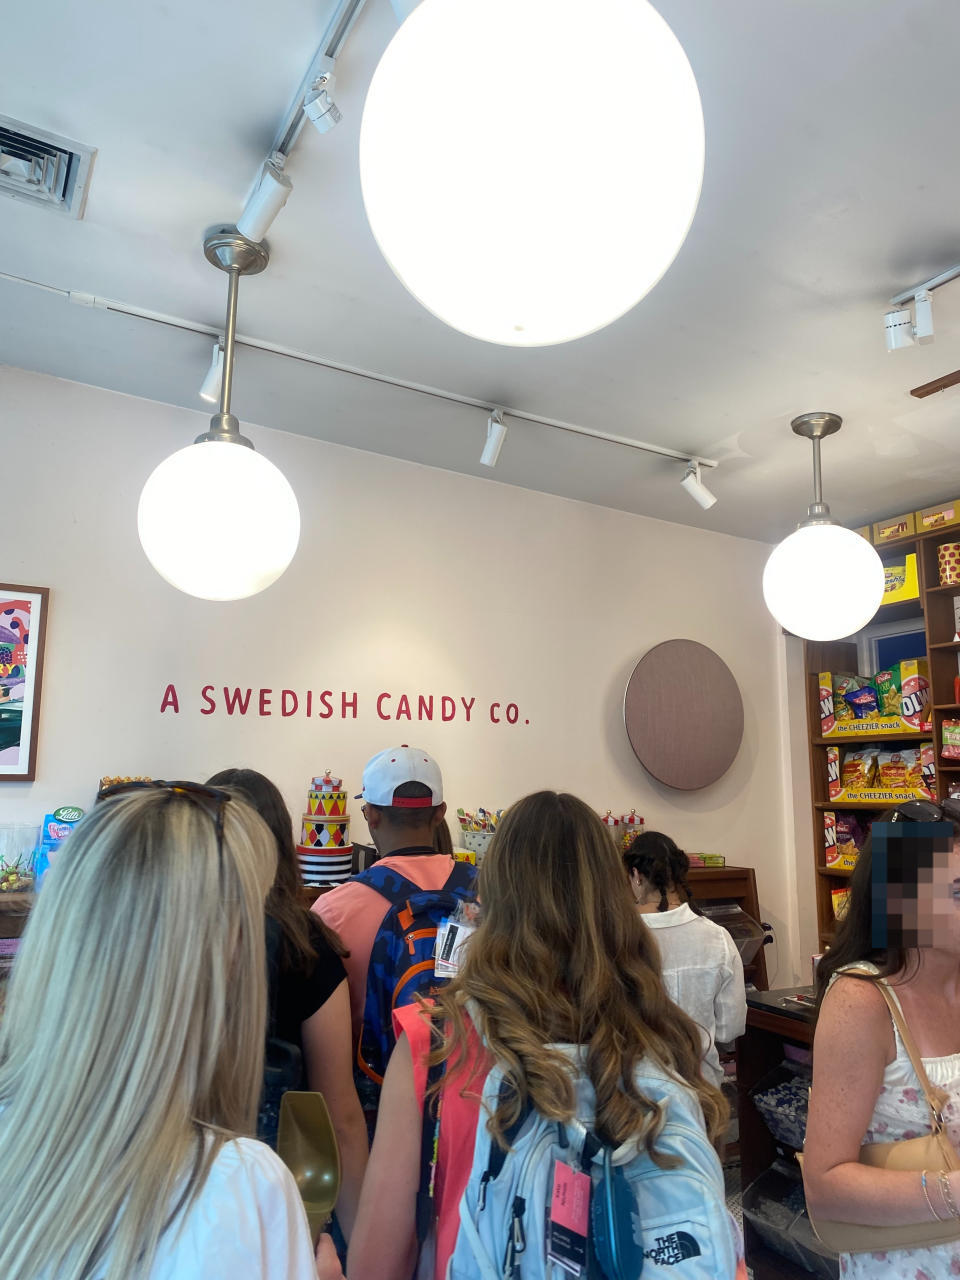 People wait in line inside BonBon, with shelves of colorful candy visible in the background